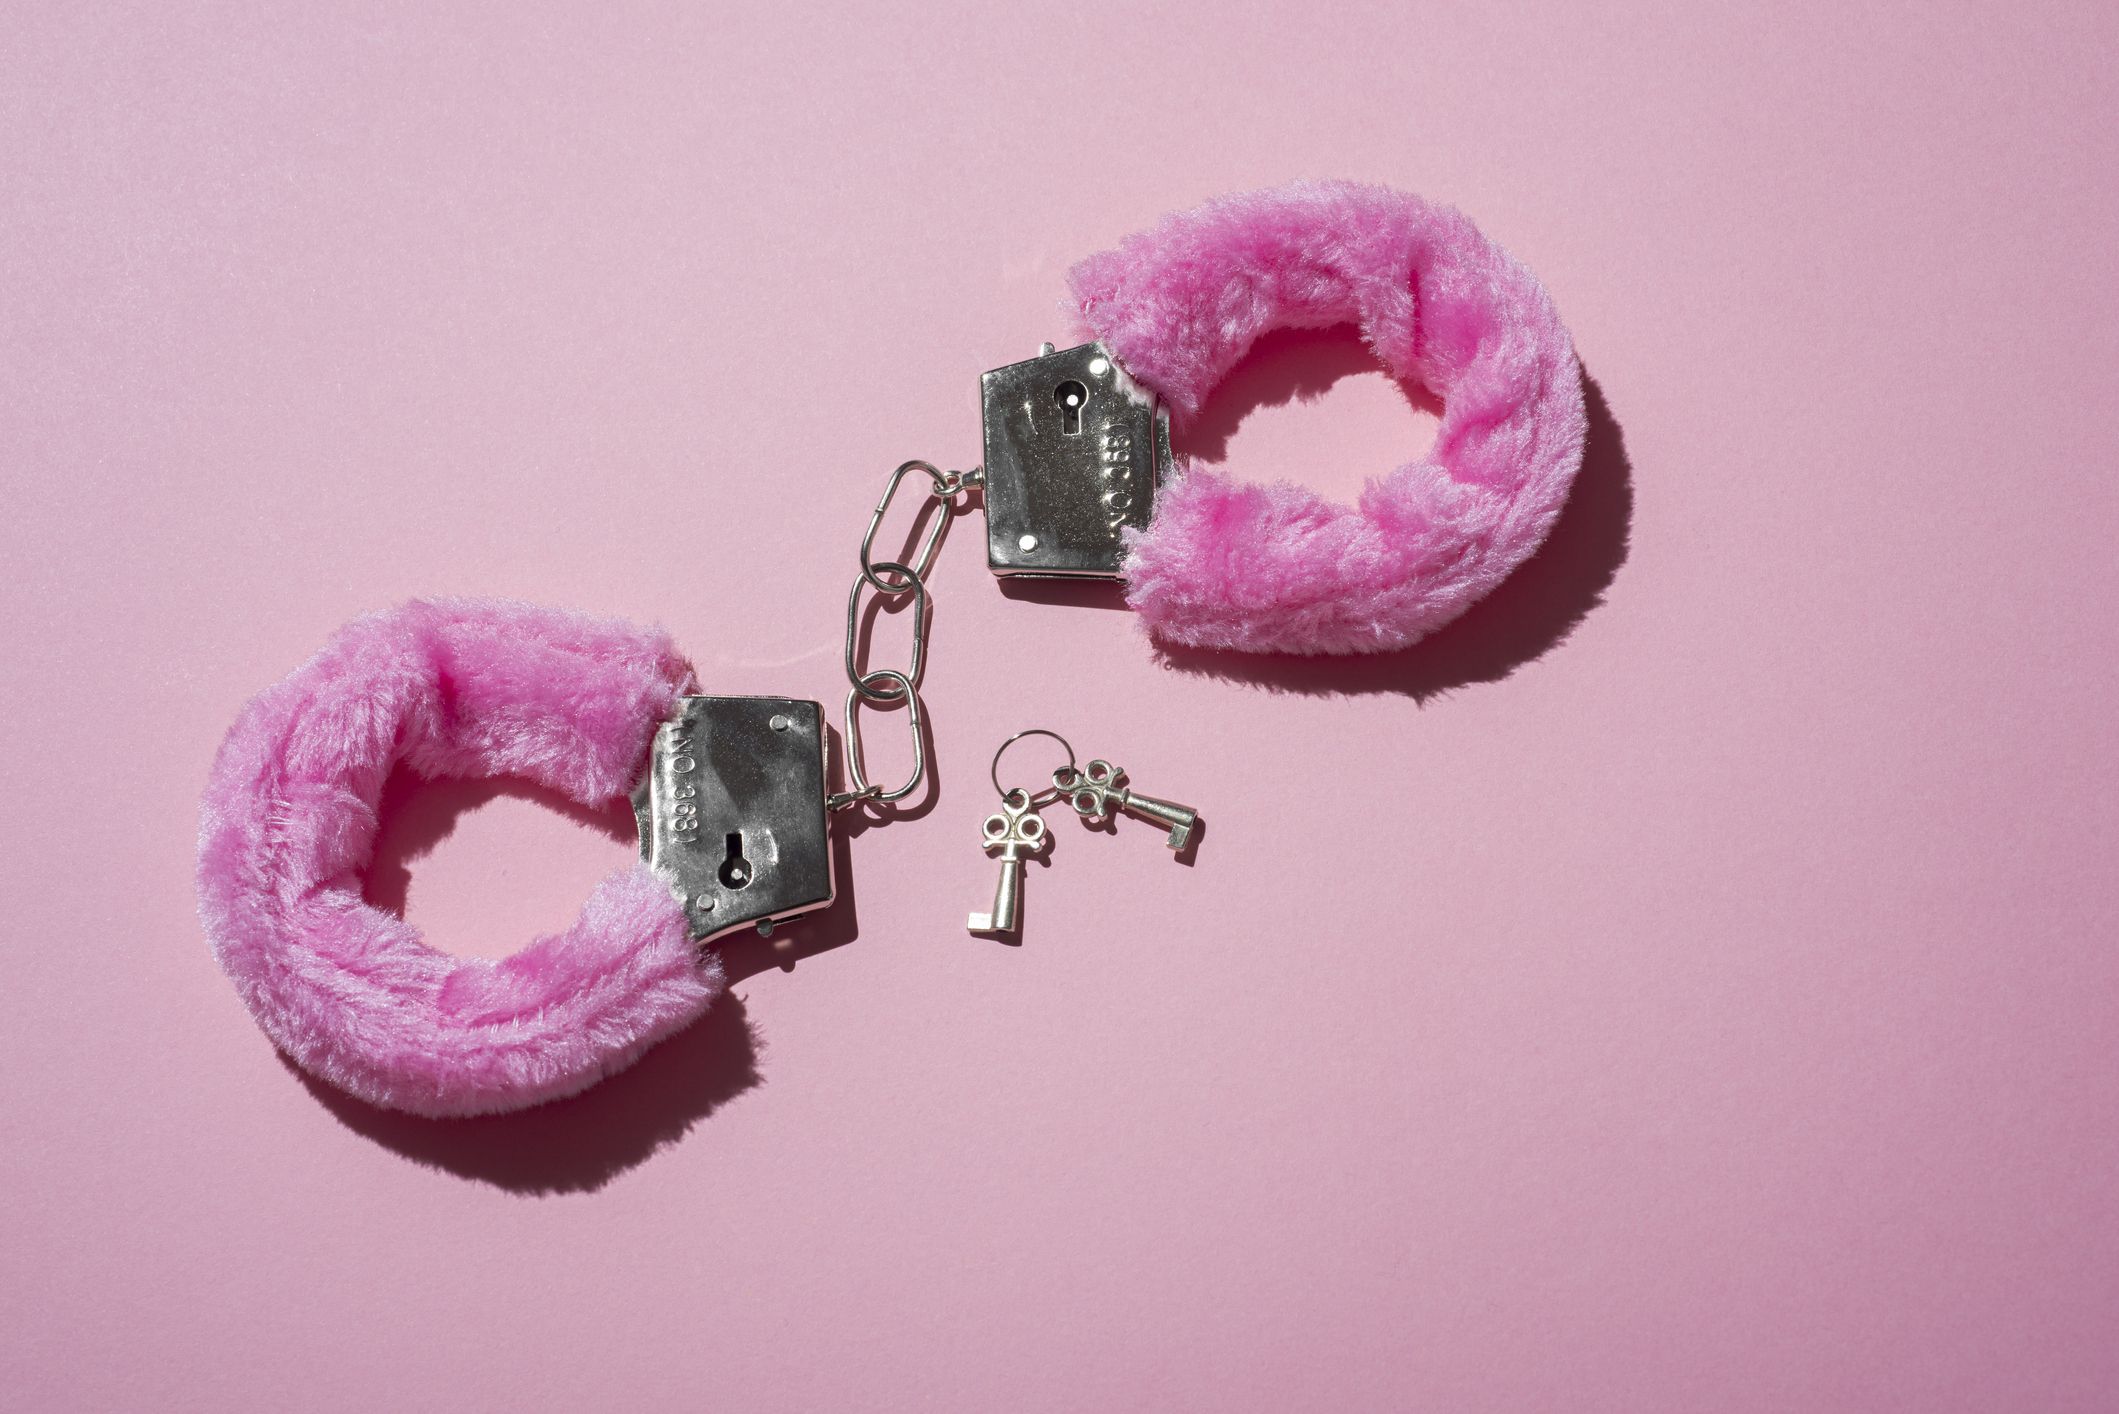 pink locked handcuffs for adult games